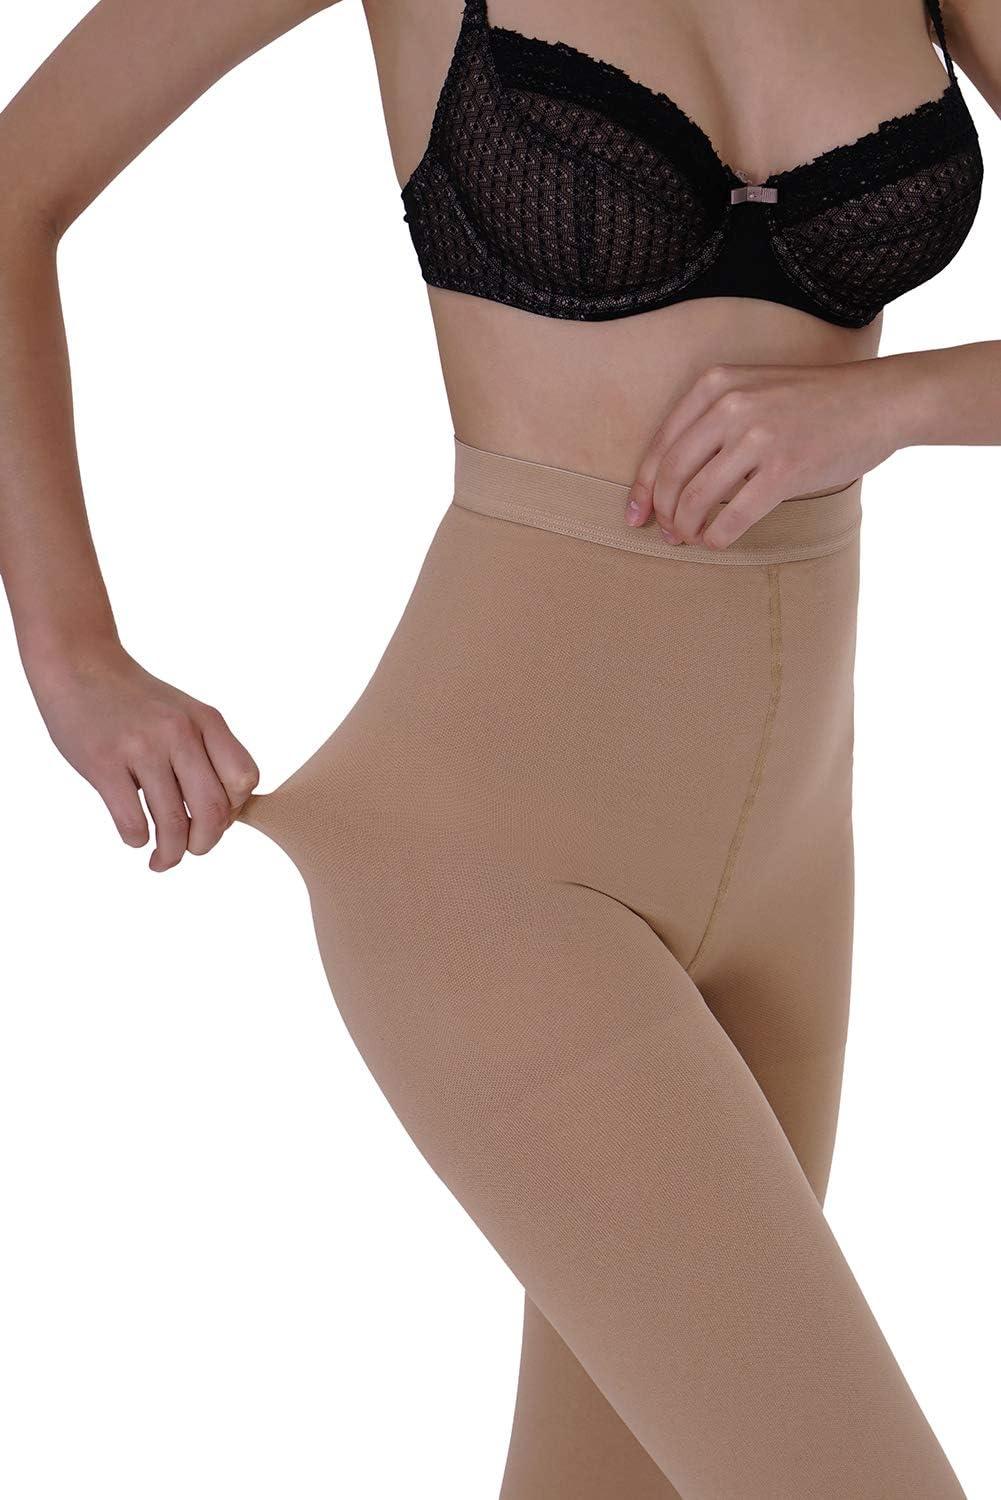 AMZAM Medical Compression Pantyhose for Women Men 15-20 mmHg Graduated  Compression Tights Opaque Toeless Compression Stockings Waist High Support  Tights for Edema Varicose Veins DVT Beige S S Open Toe Beige